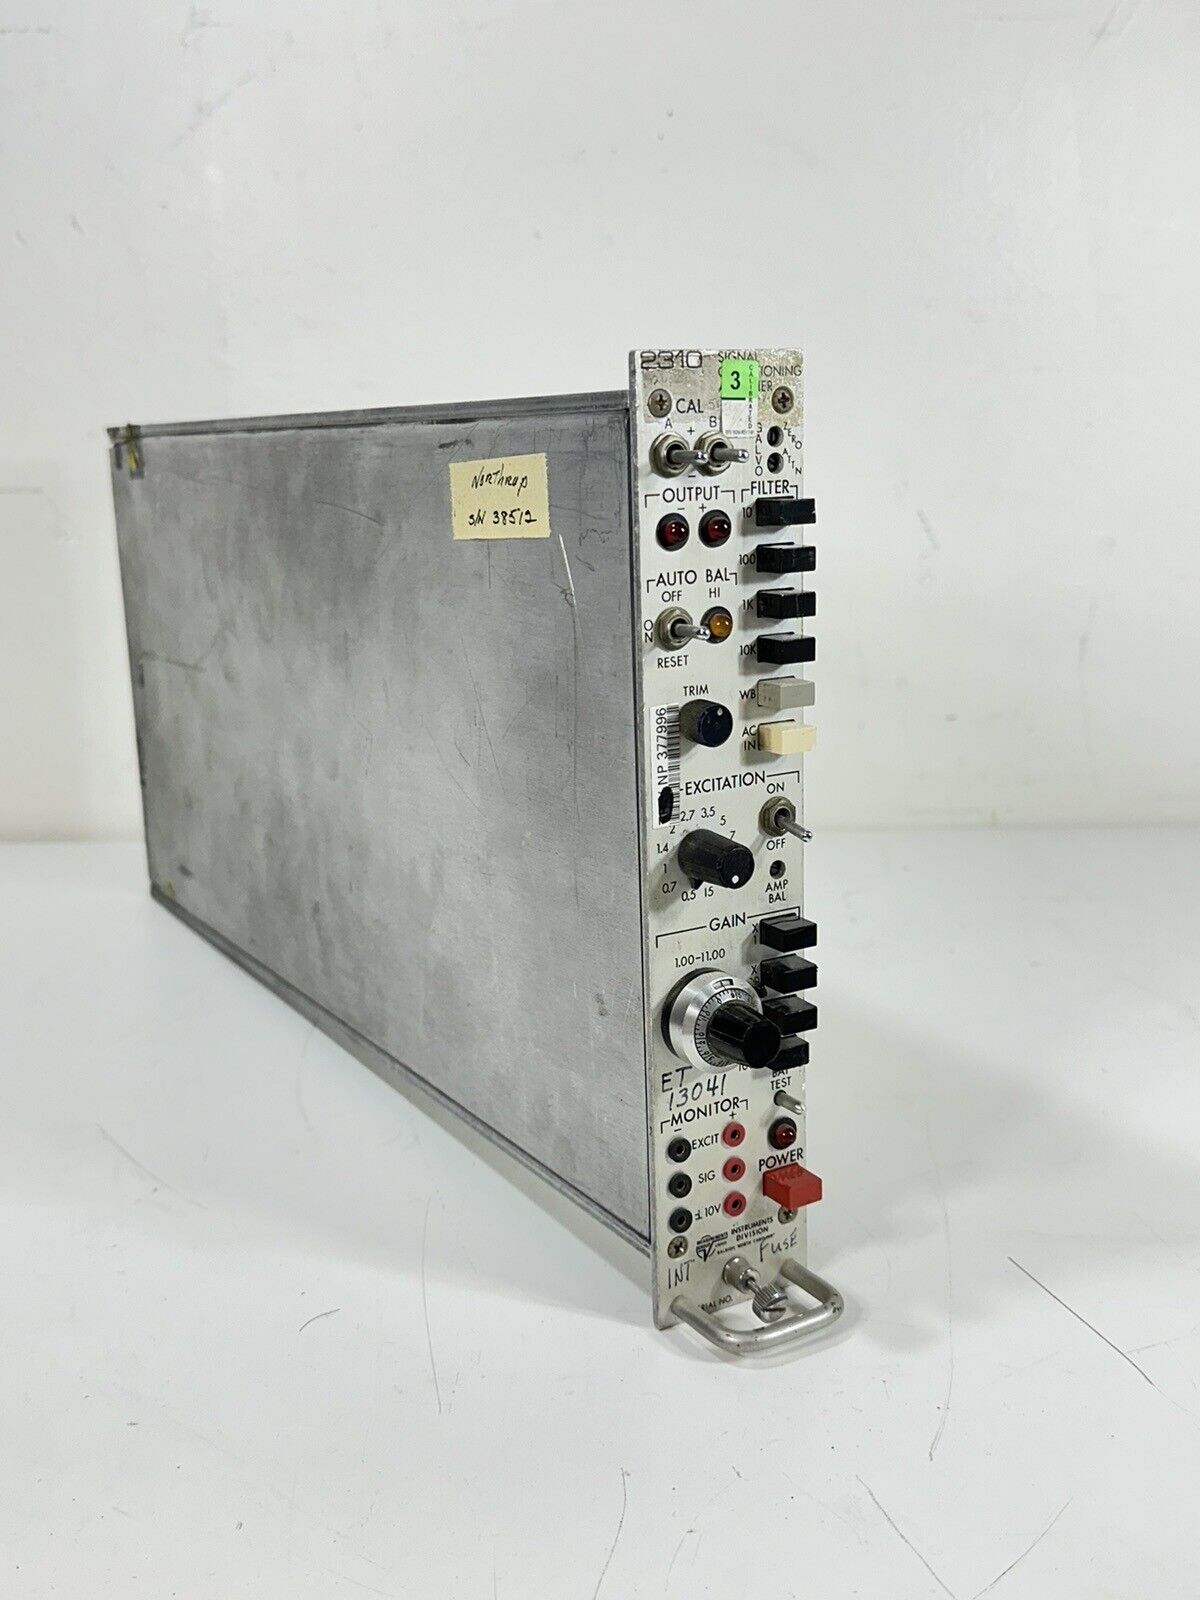 UNTESTED Vishay Measurements Group 2310 Signal Conditioning Amplifier Module #6